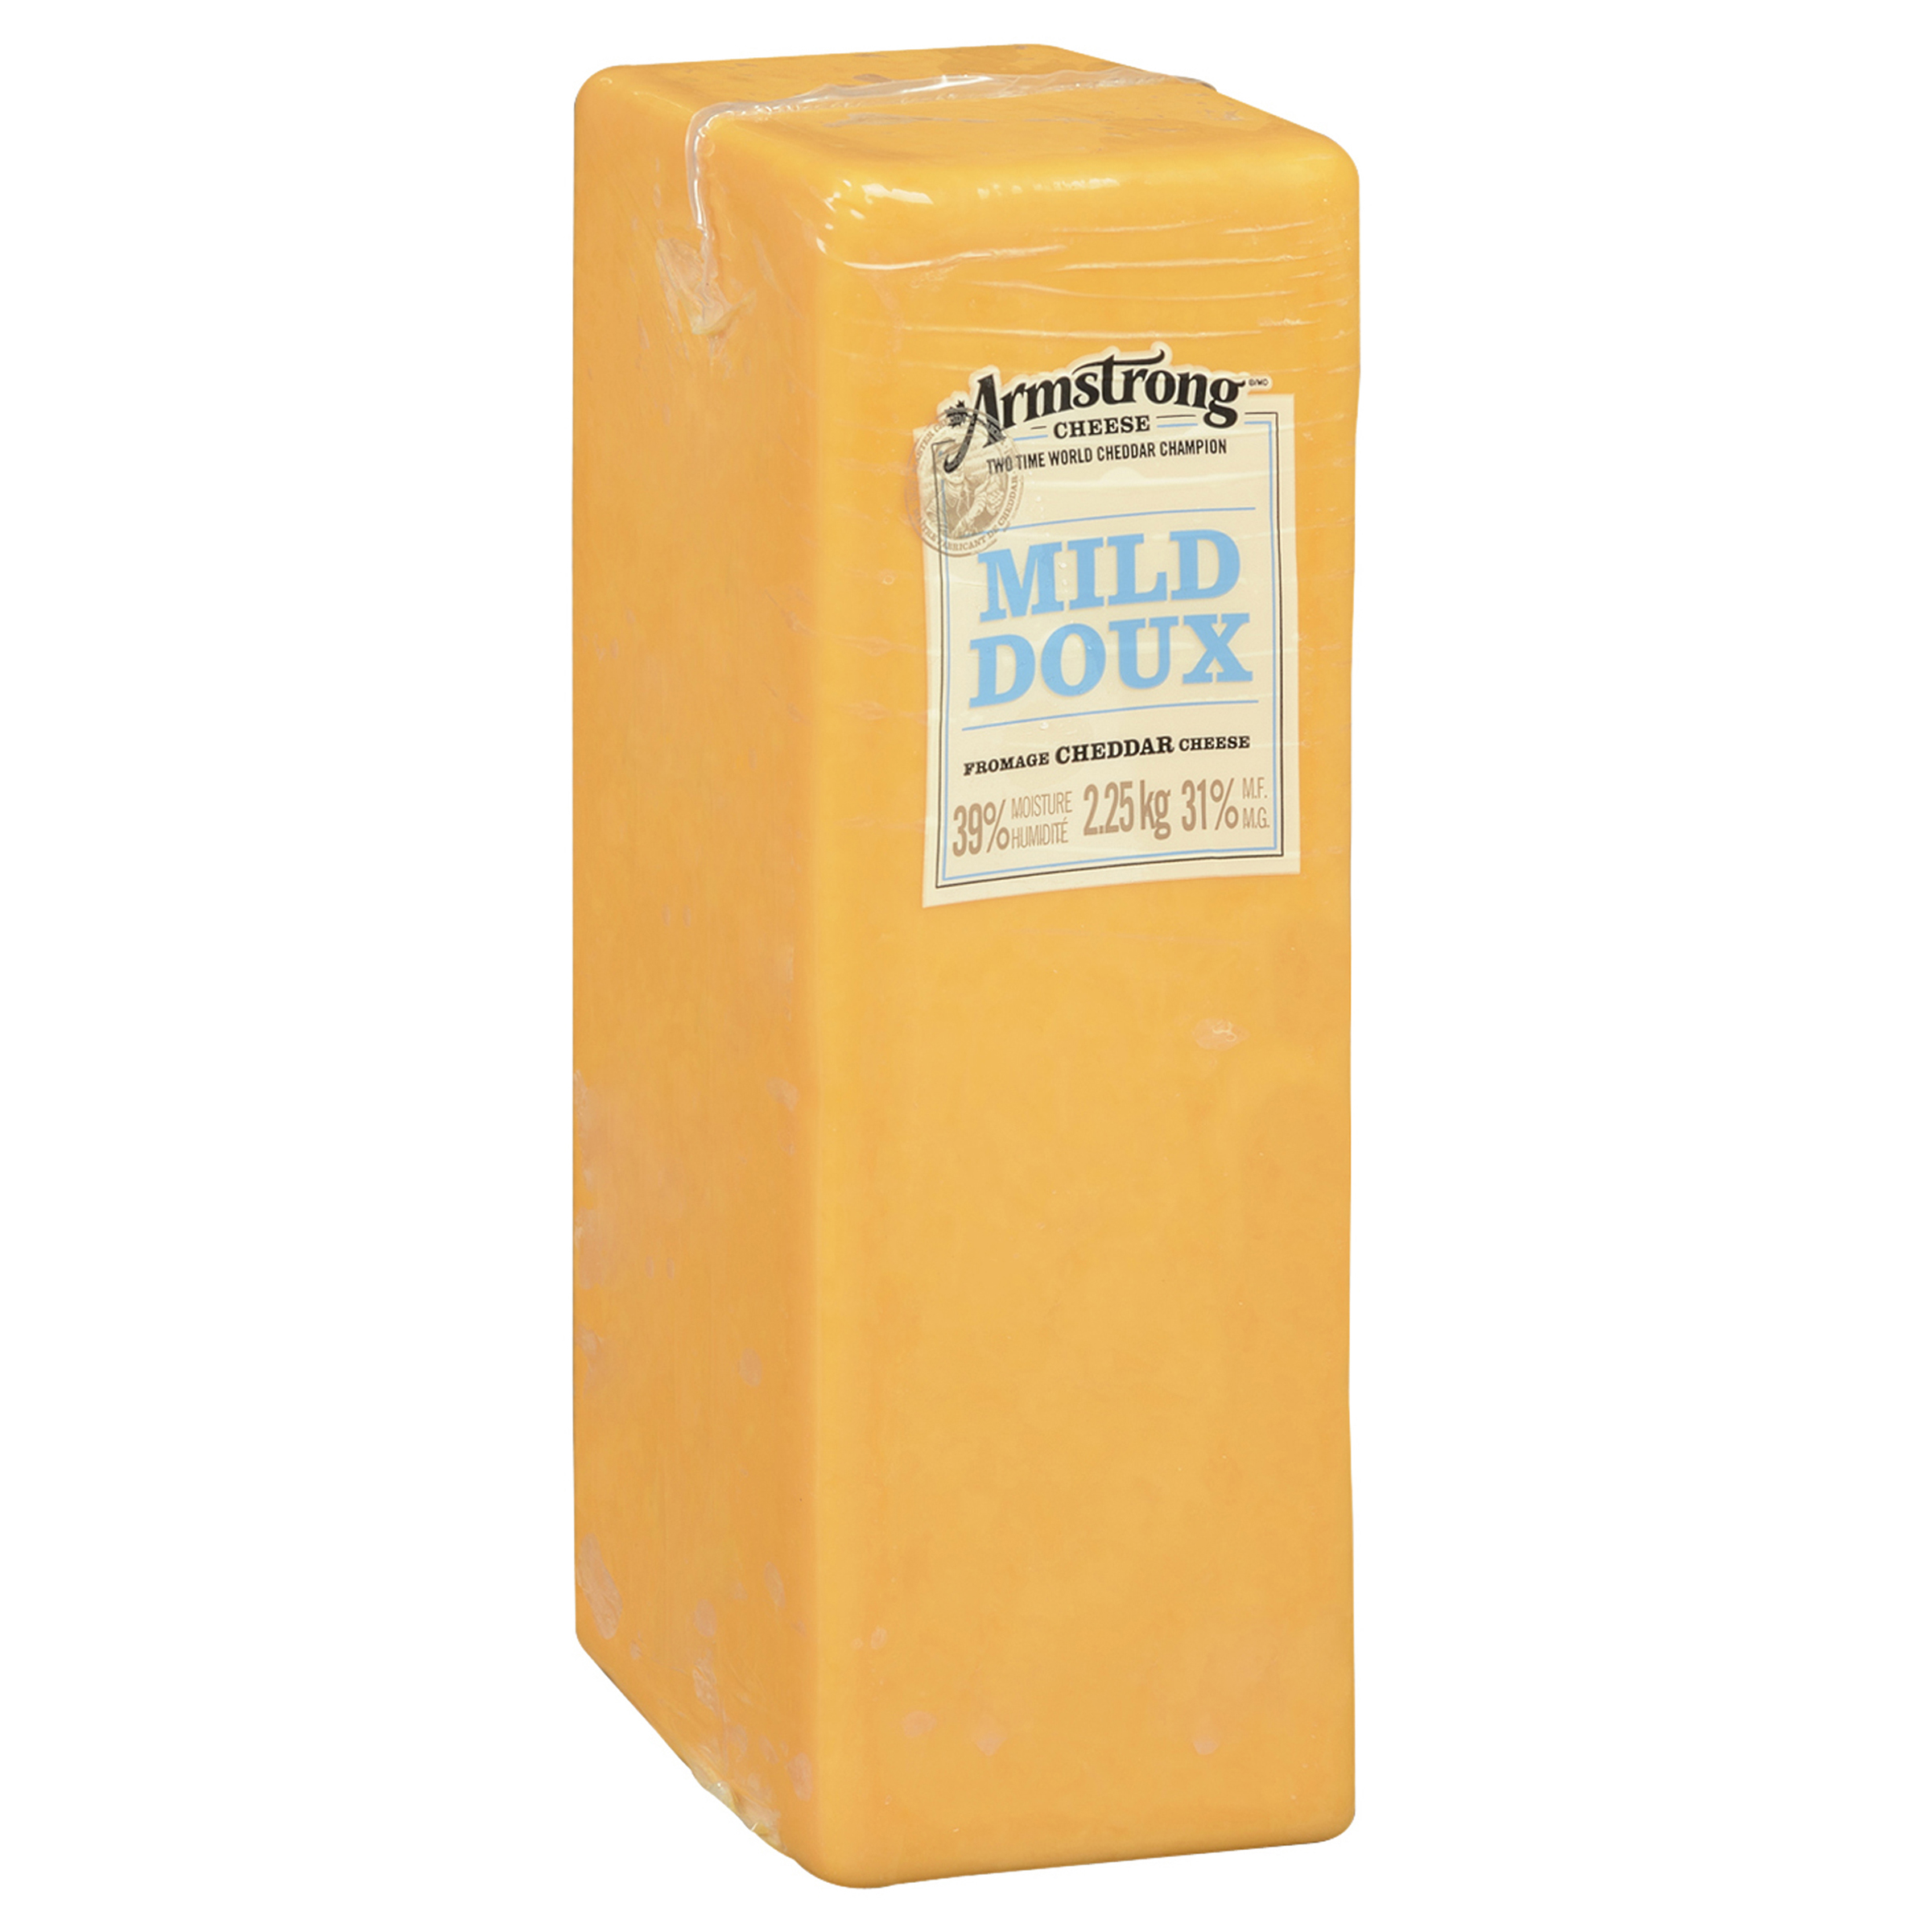 fromage cheddar jaune doux 2.26kg